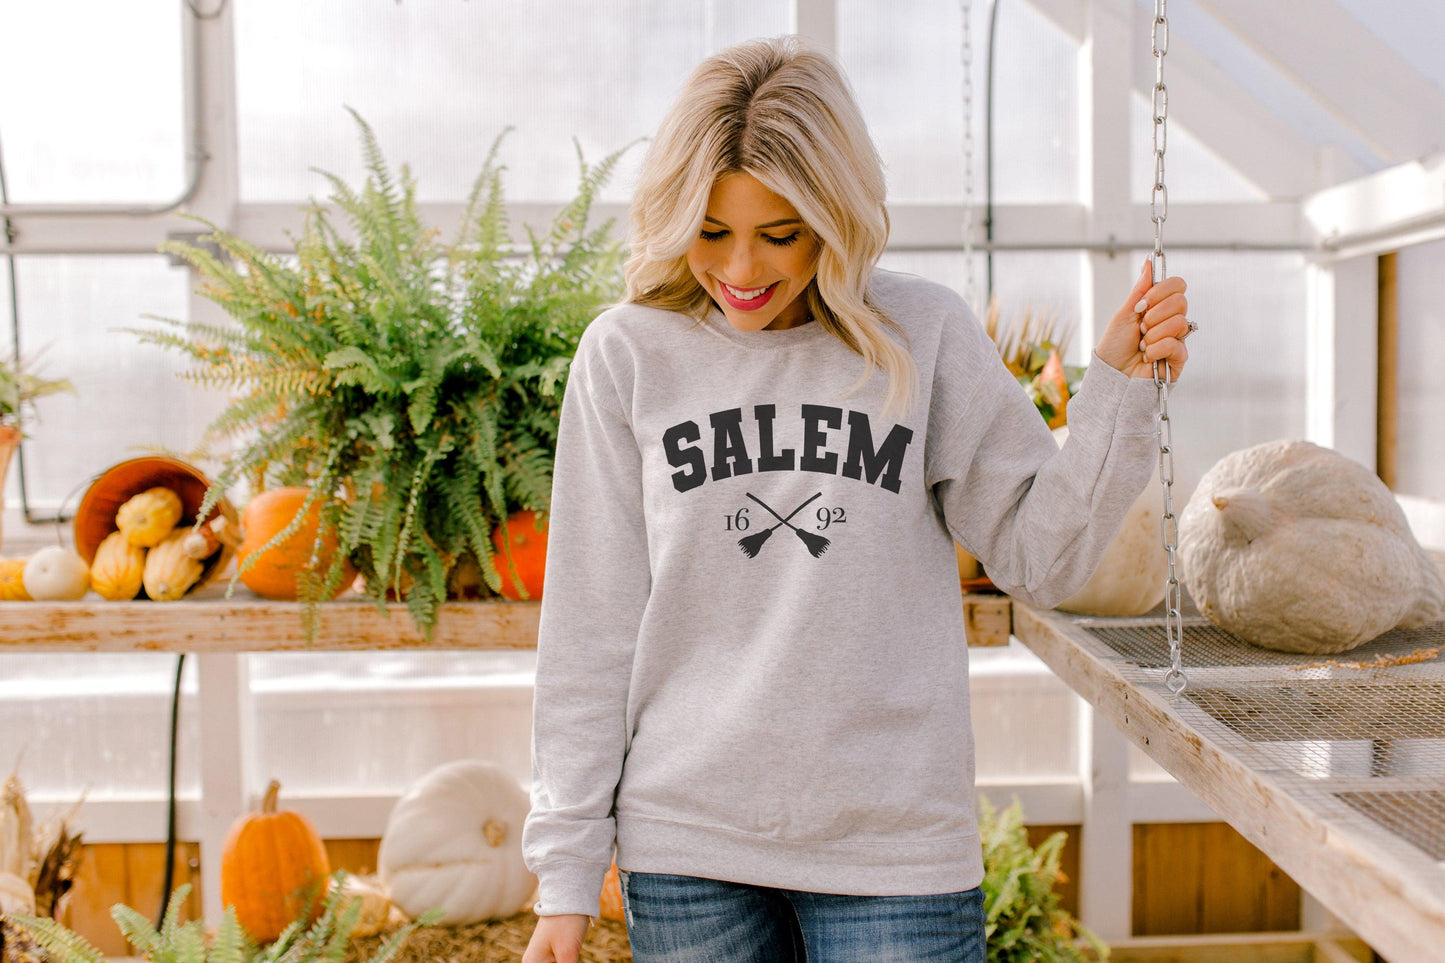 Salem 1692 Crewneck with Witches Brooms